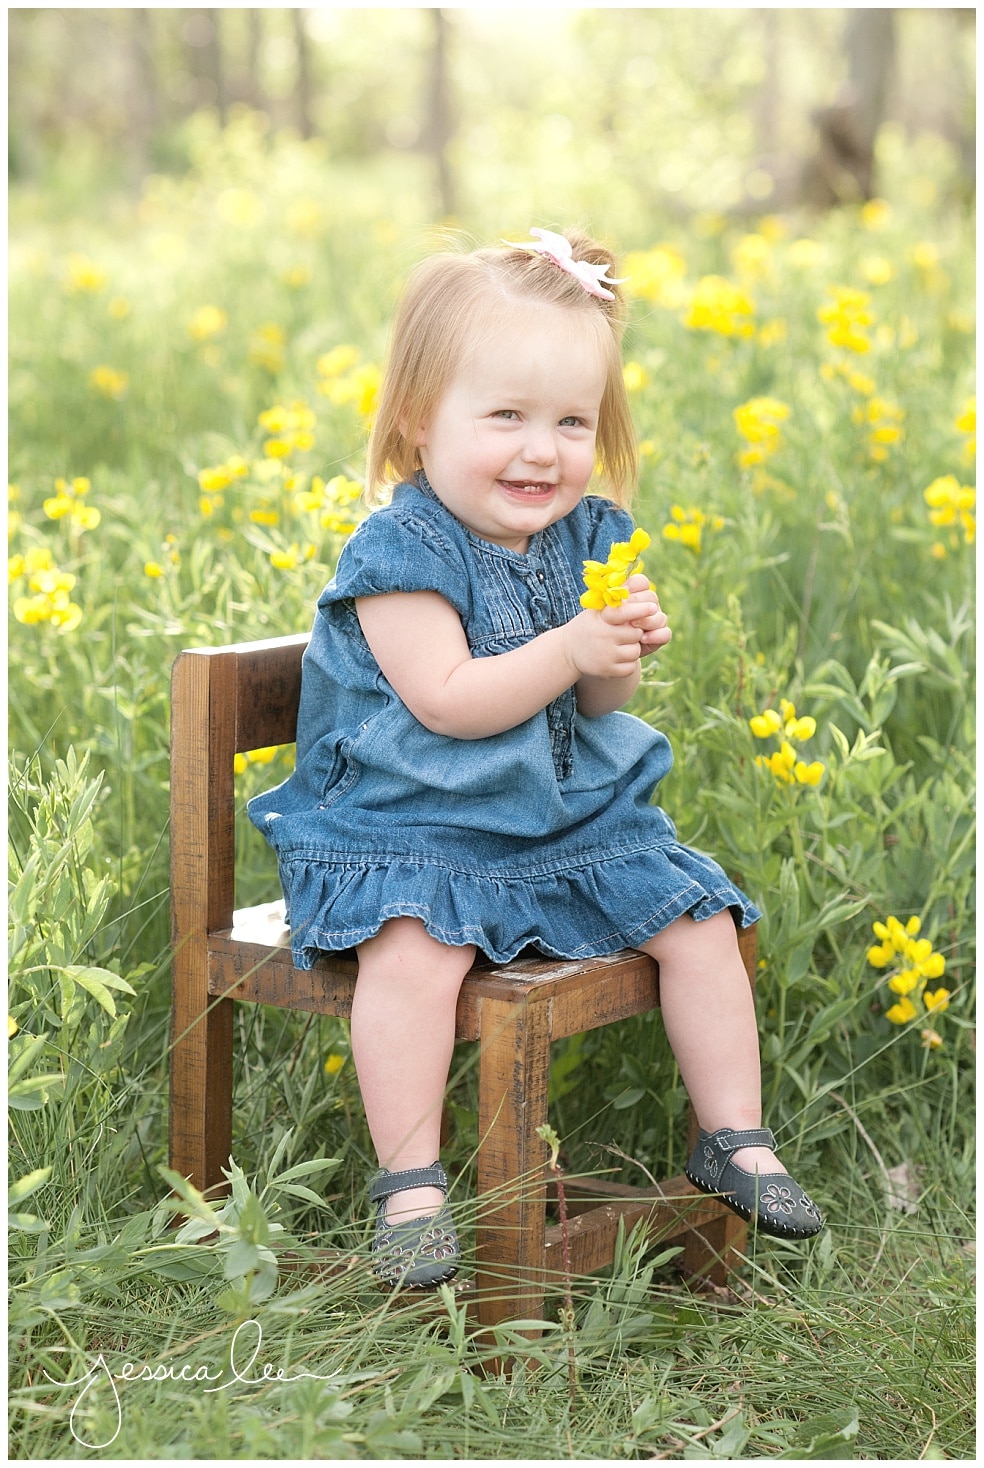 Louisville Colorado Family Photographer, little girl in chair smiling